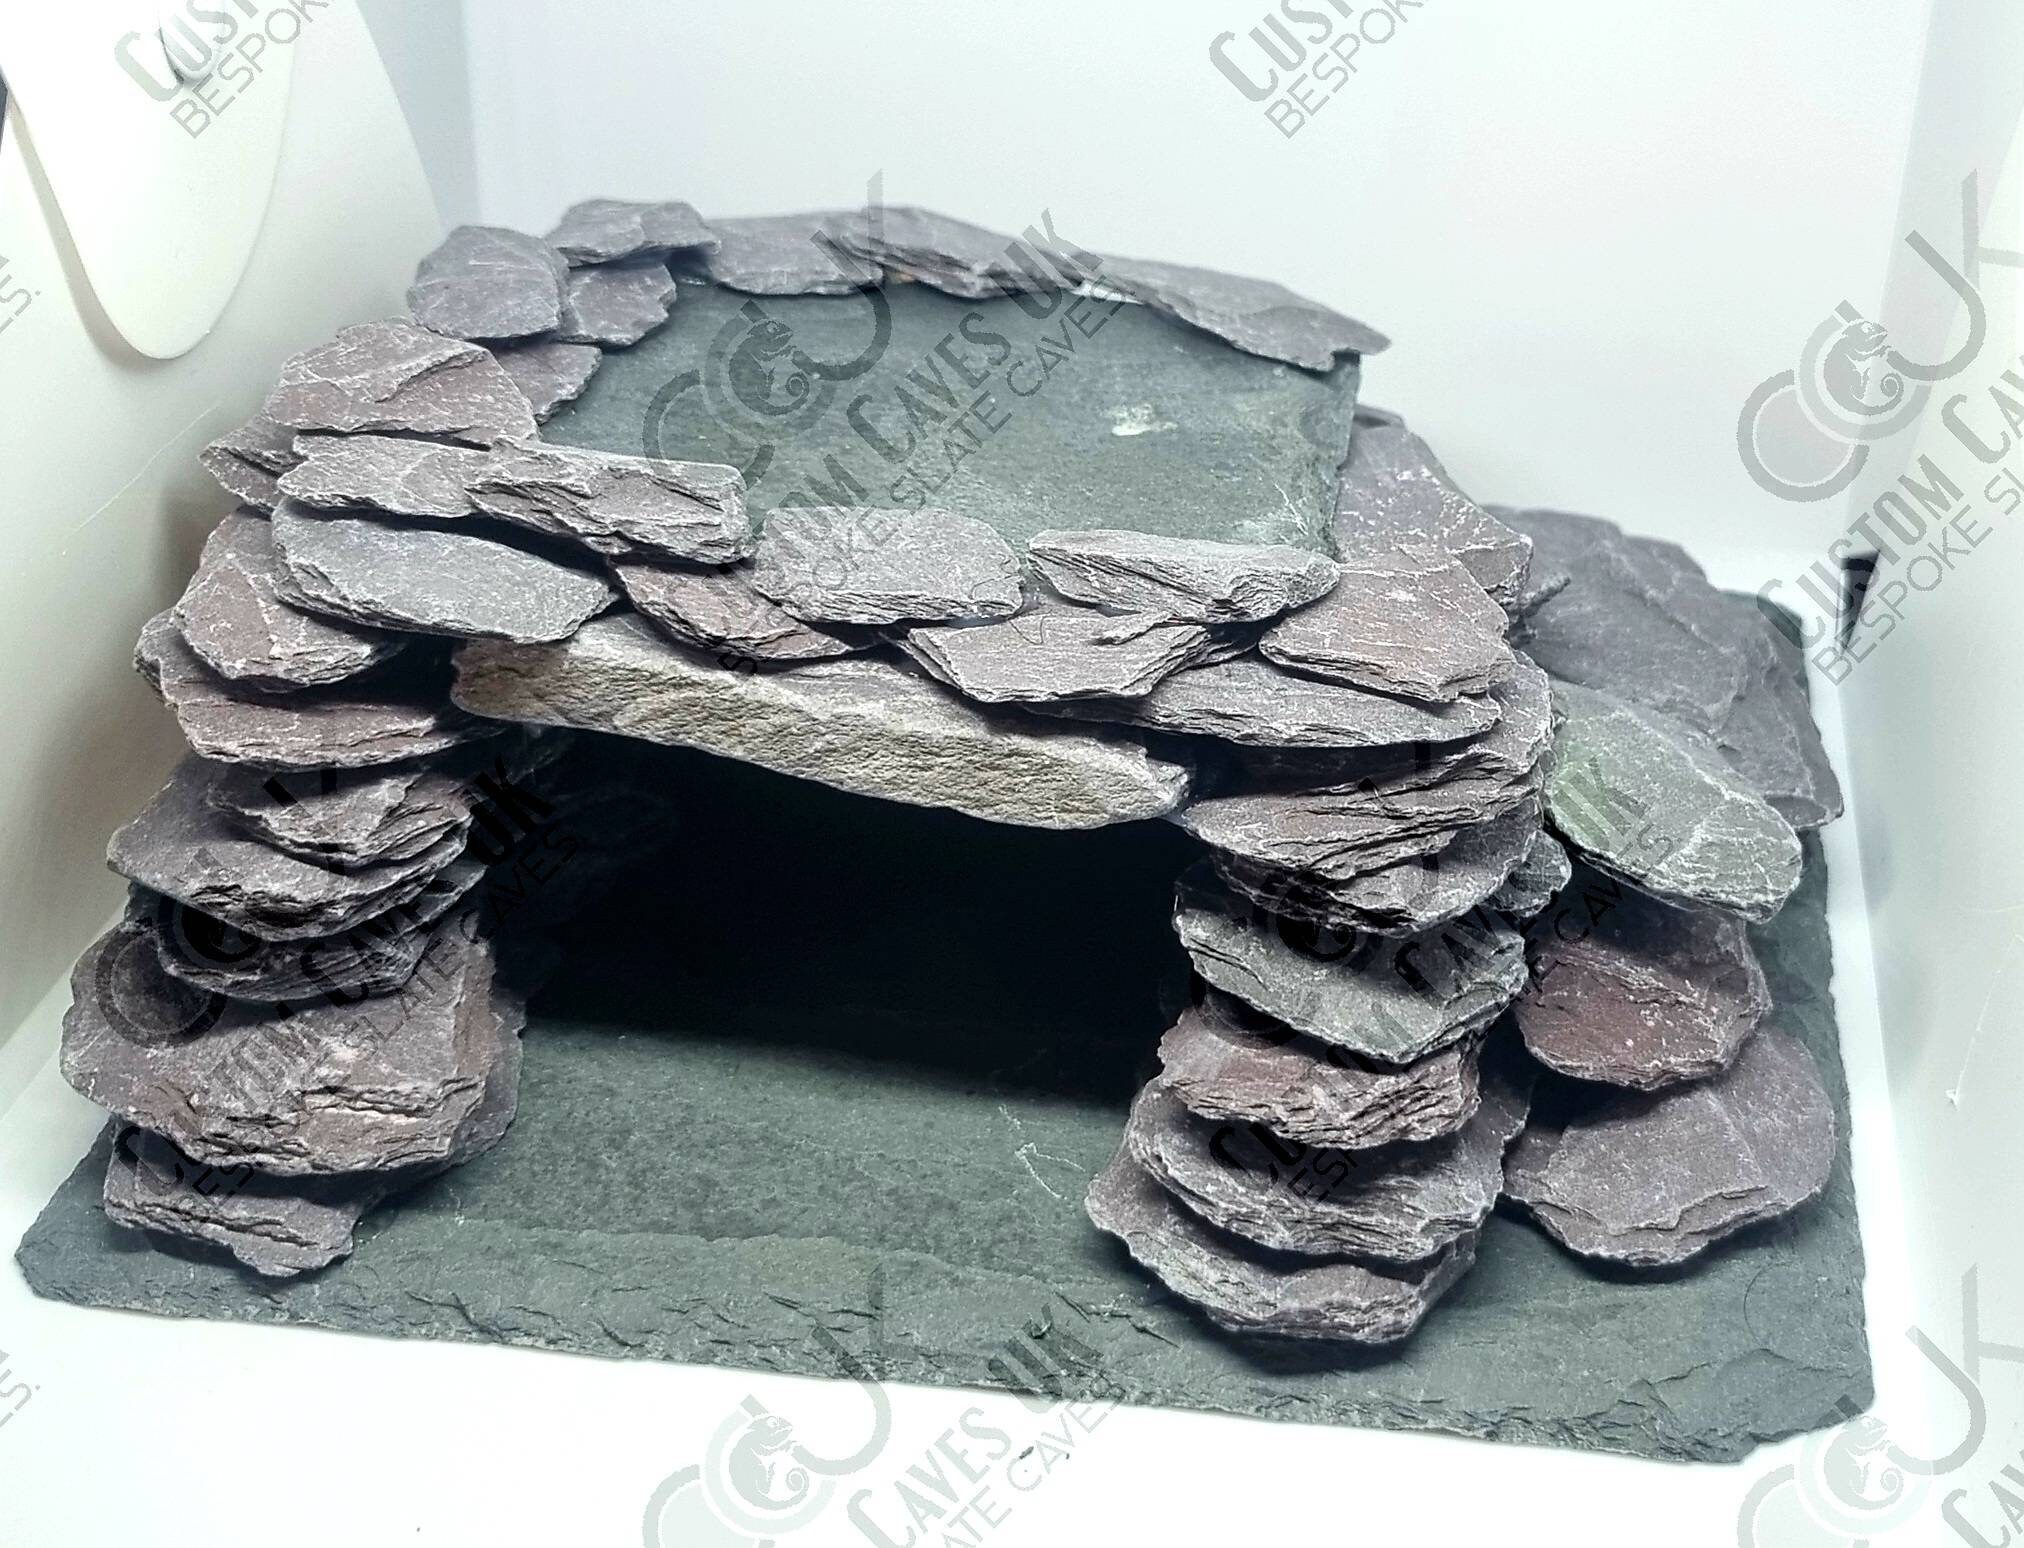 This is my new leopard geckos naturalistic set up. I used excavator clay to  make a túnel and a hide, I used a solid rock hide which will retain the  heat from